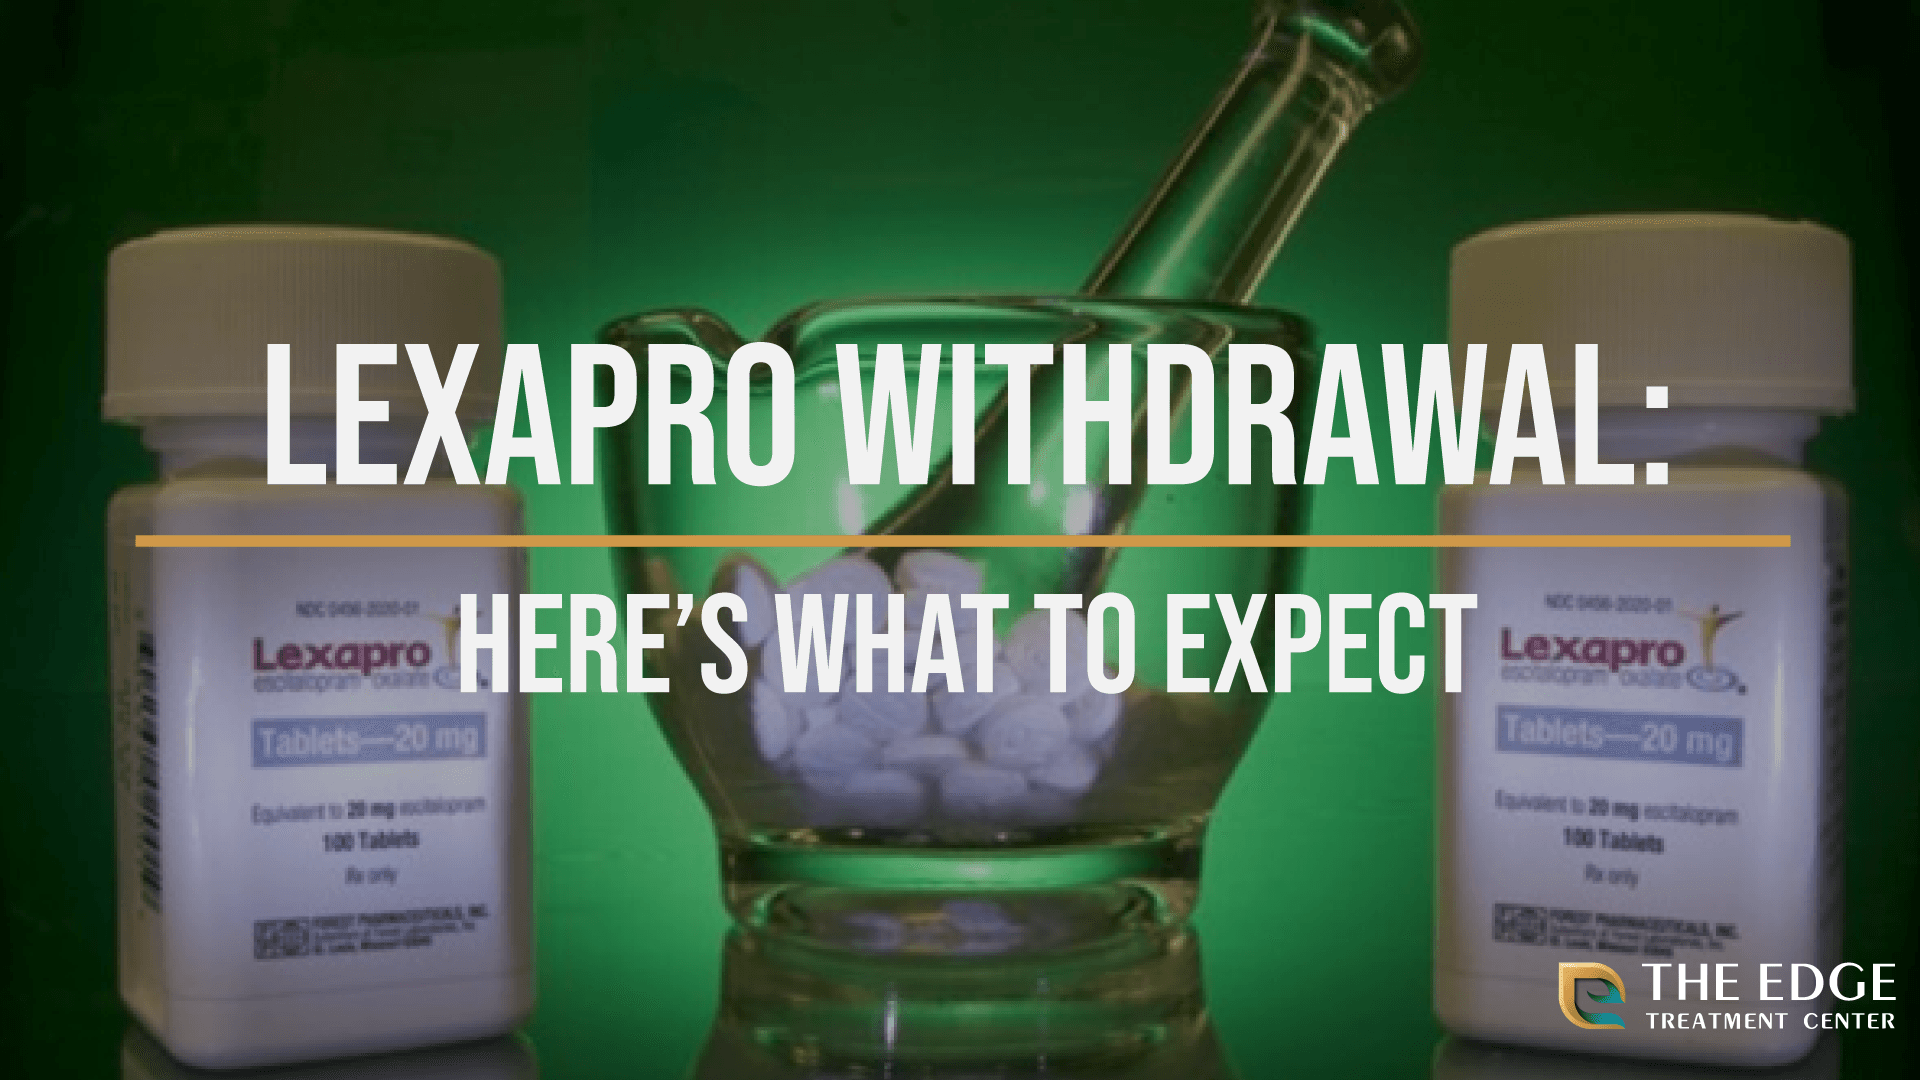 What is Lexapro Withdrawal Like?